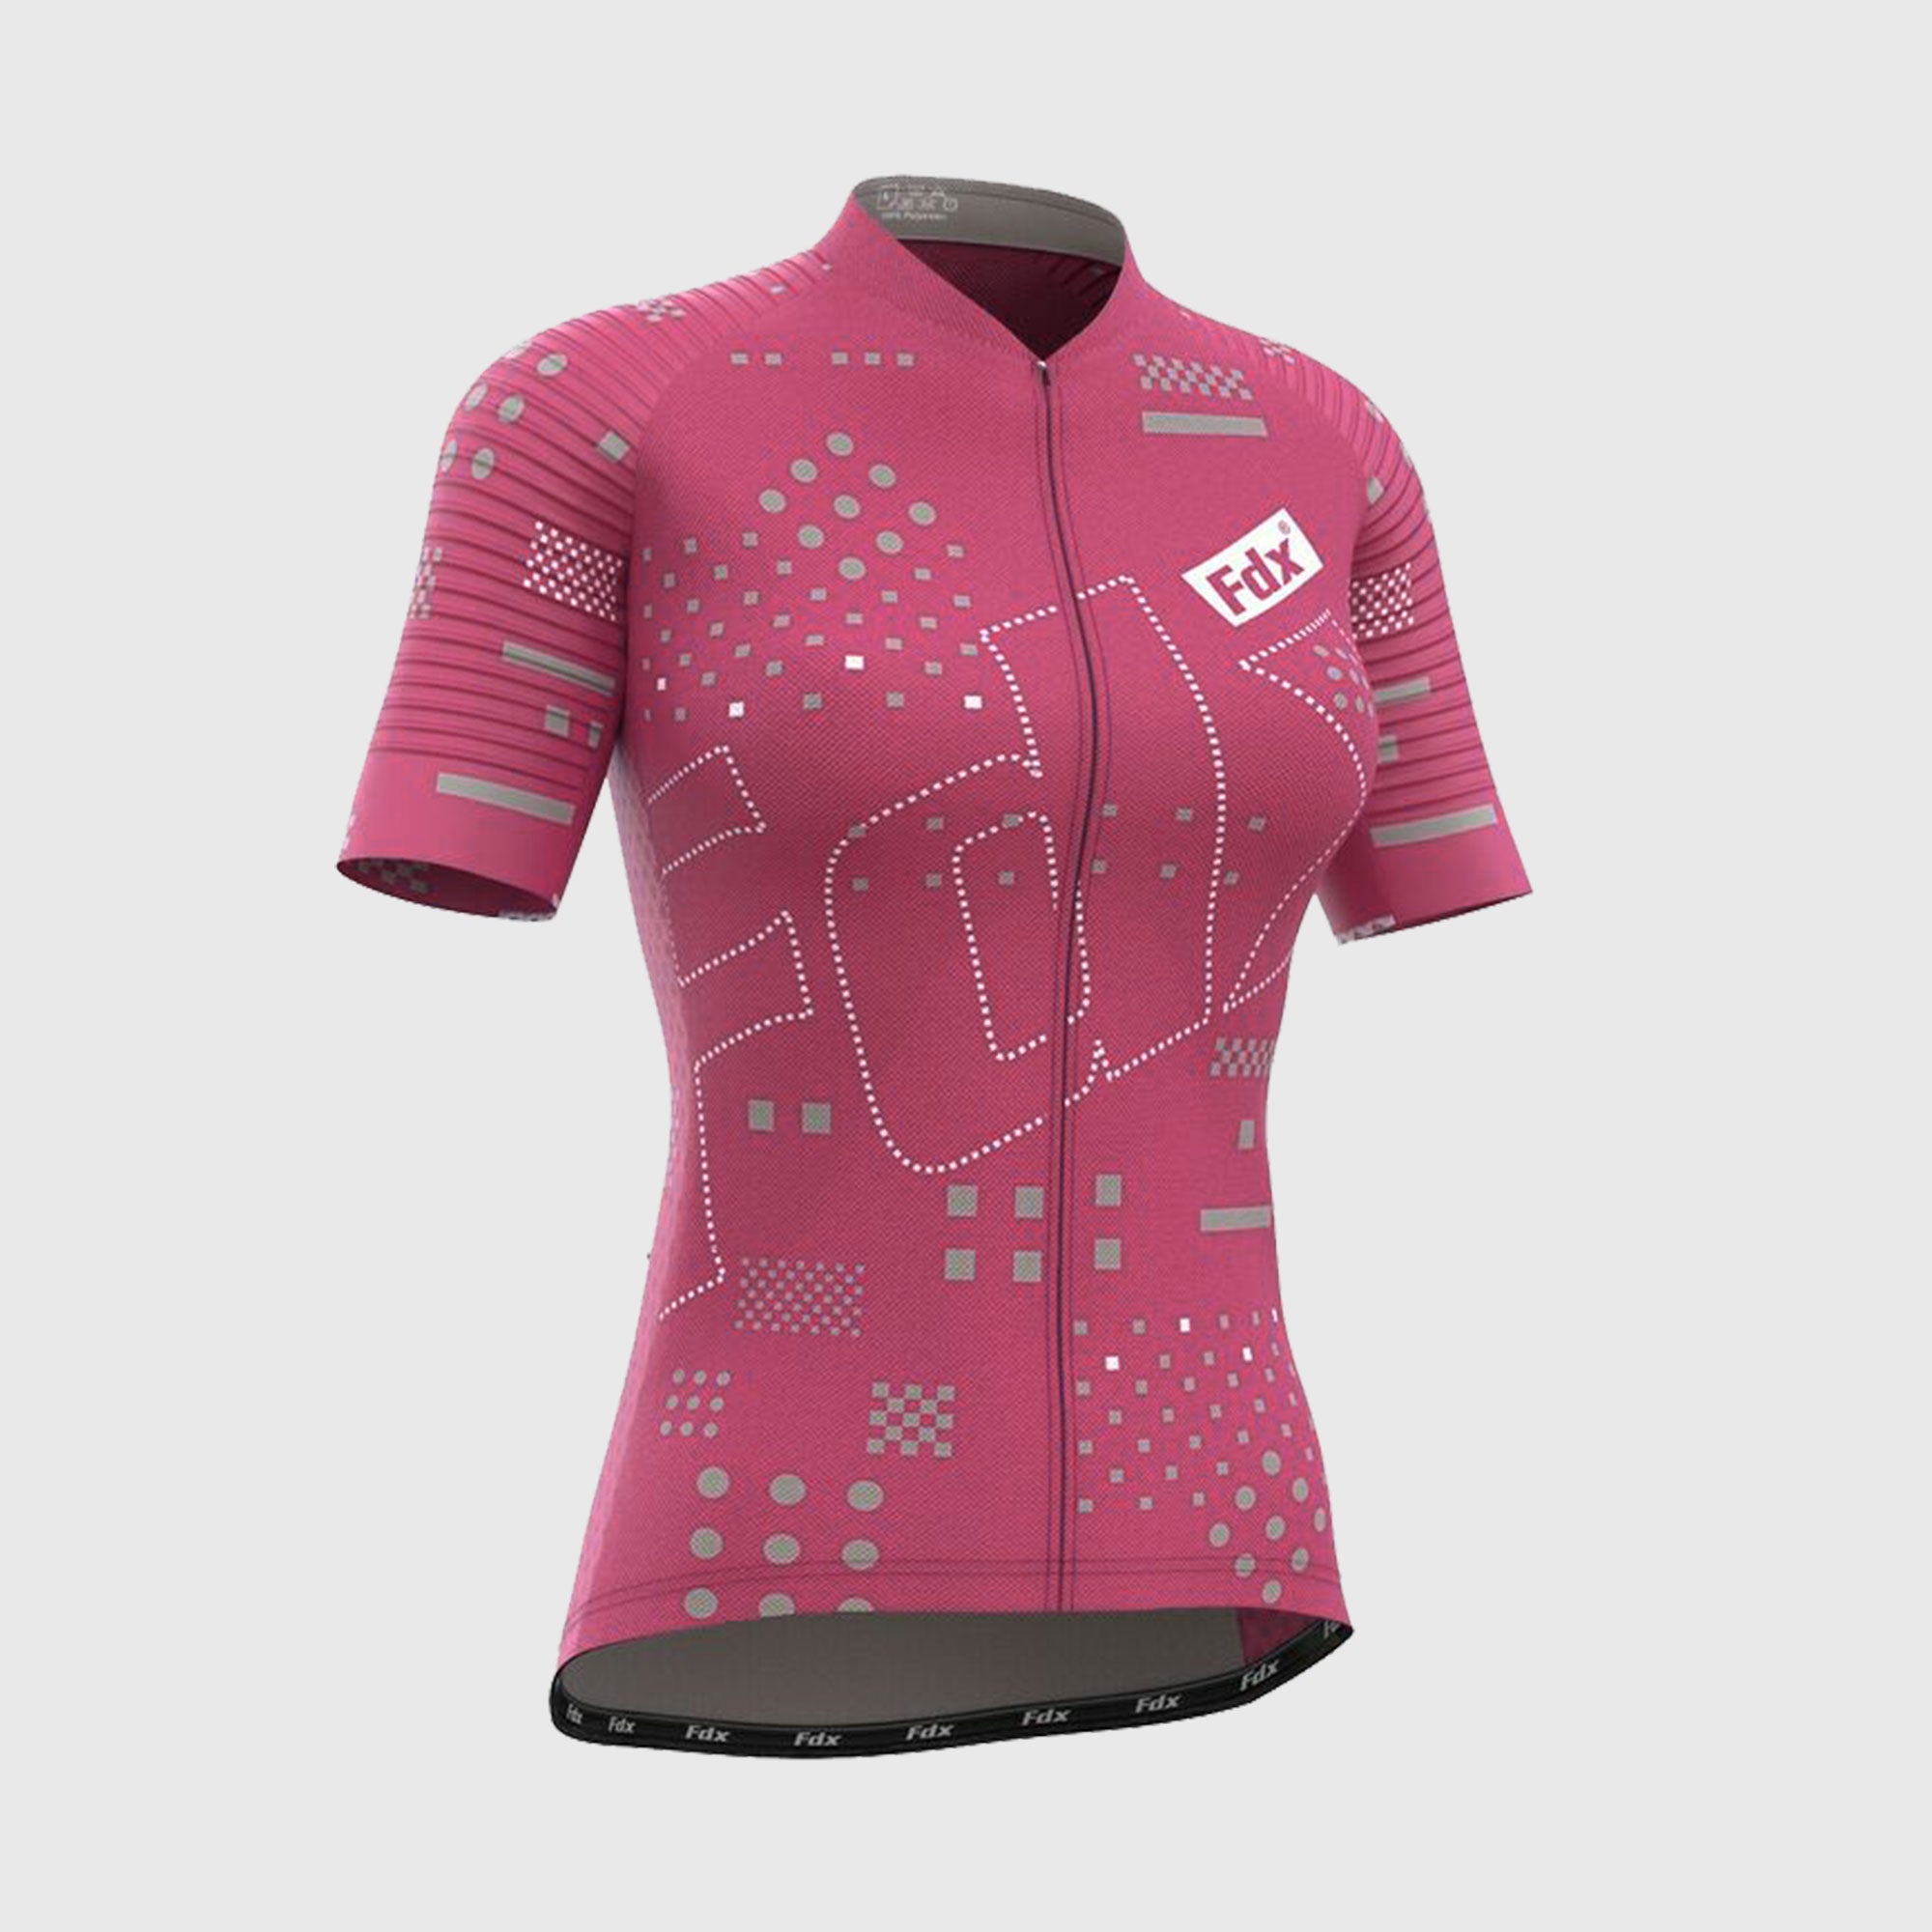 Related: Pink Women 2 Jersey